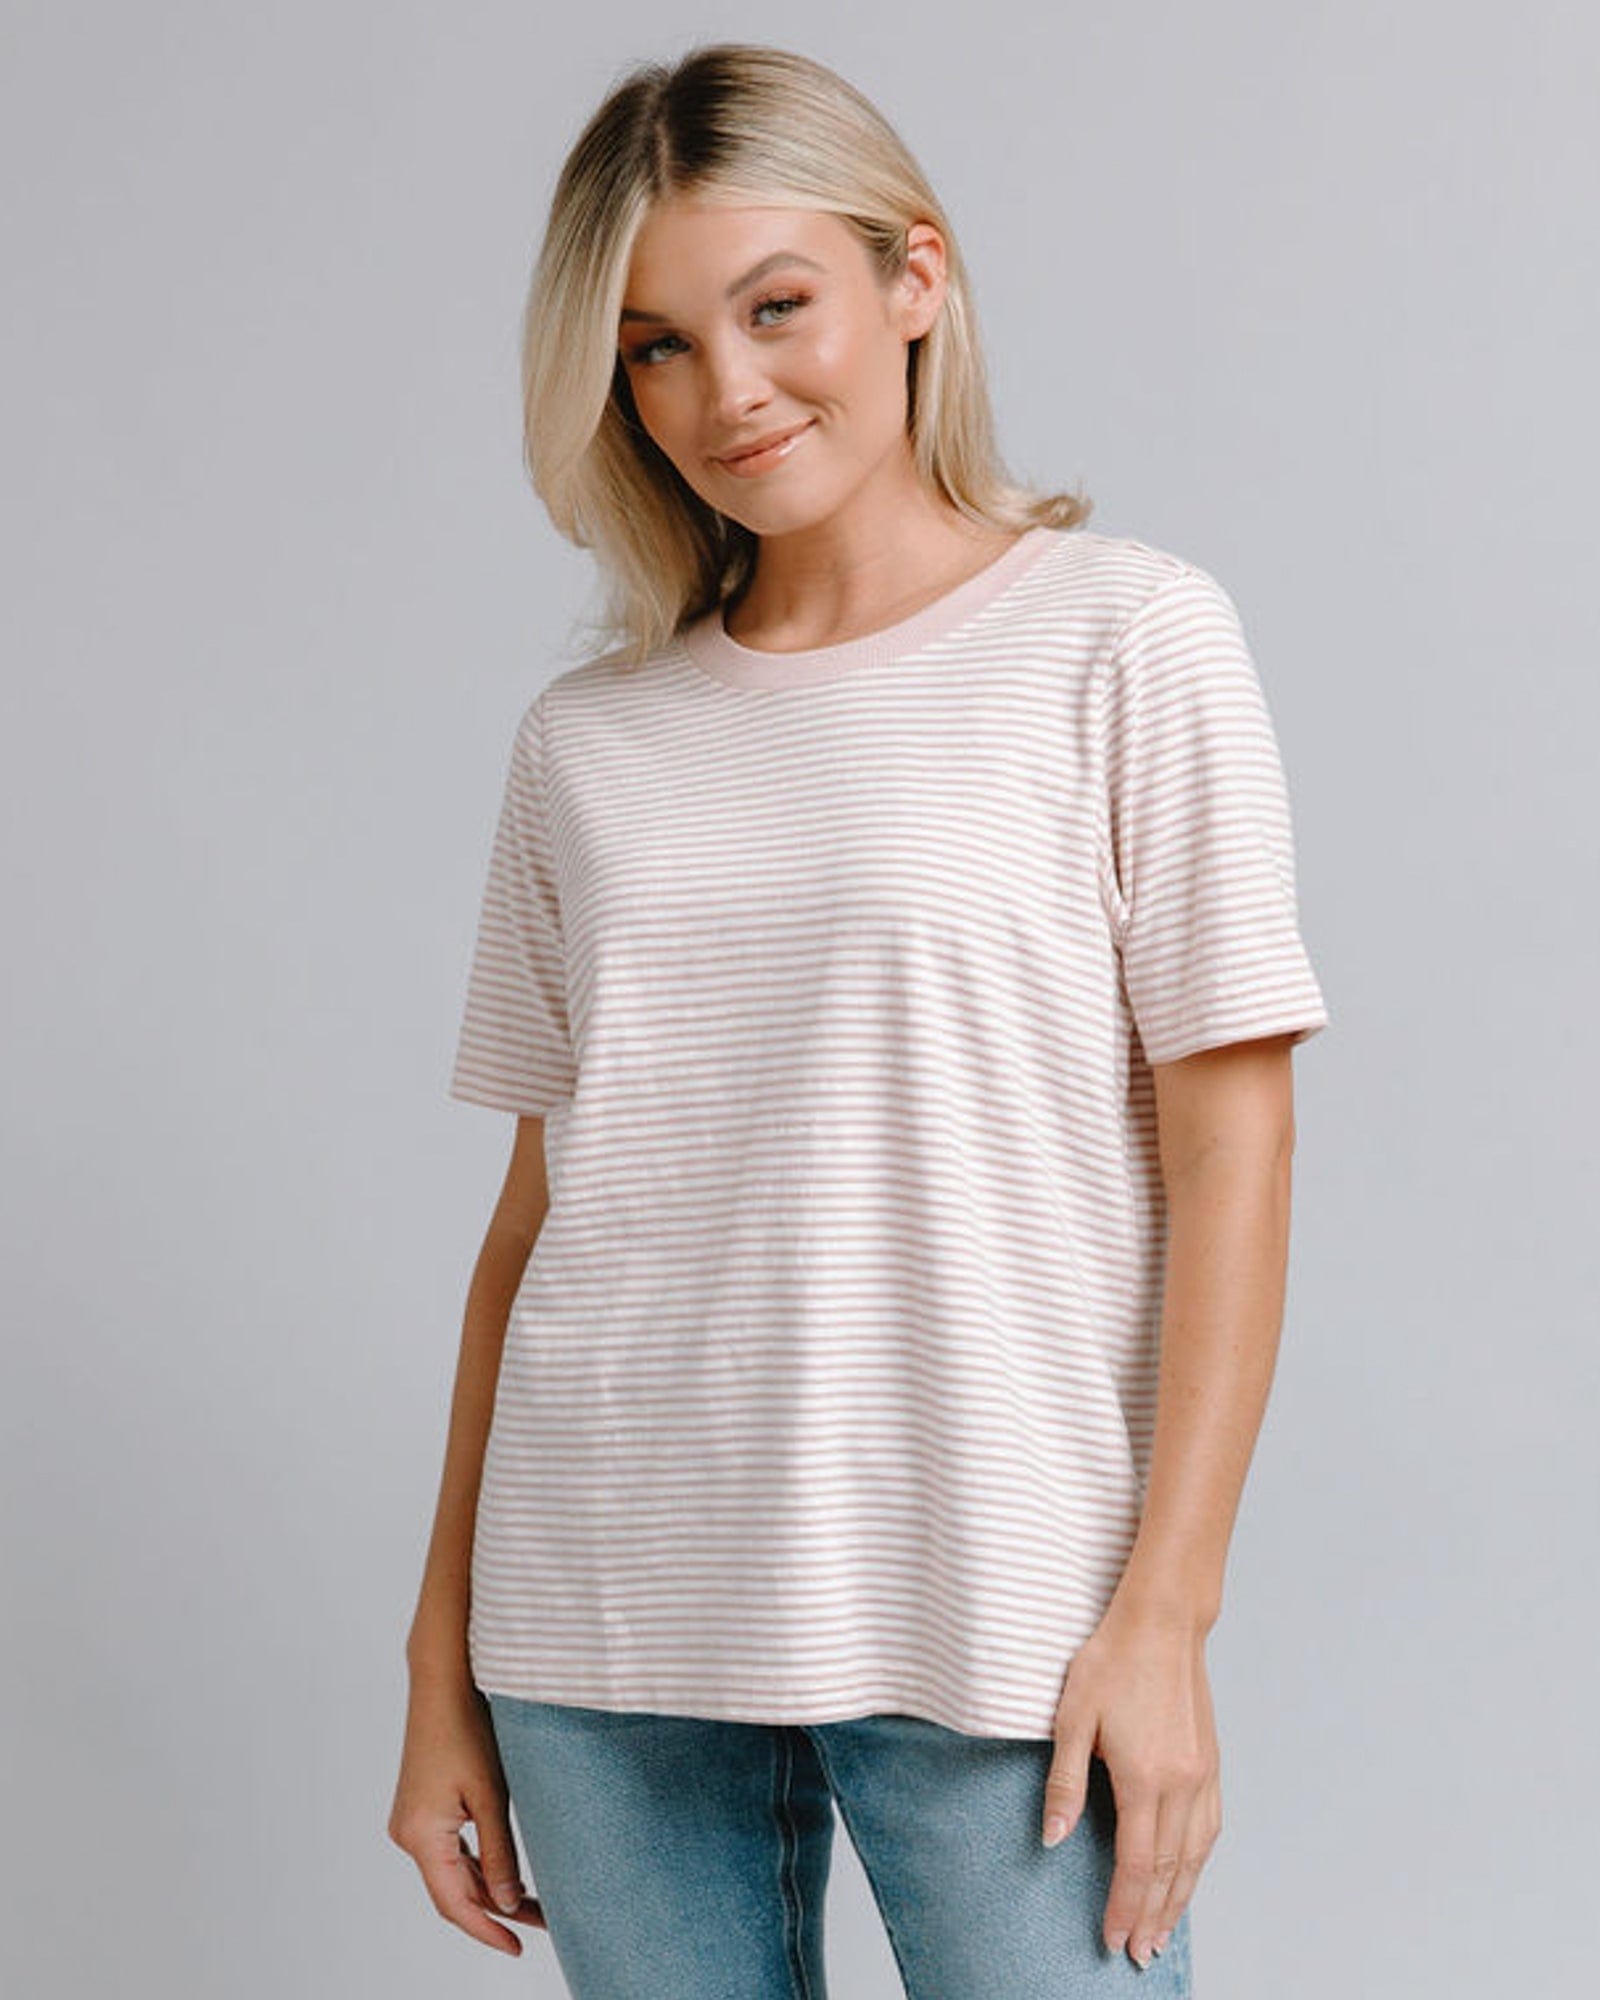 Woman in a shosrt sleeve, loose fit, pink striped tshirt